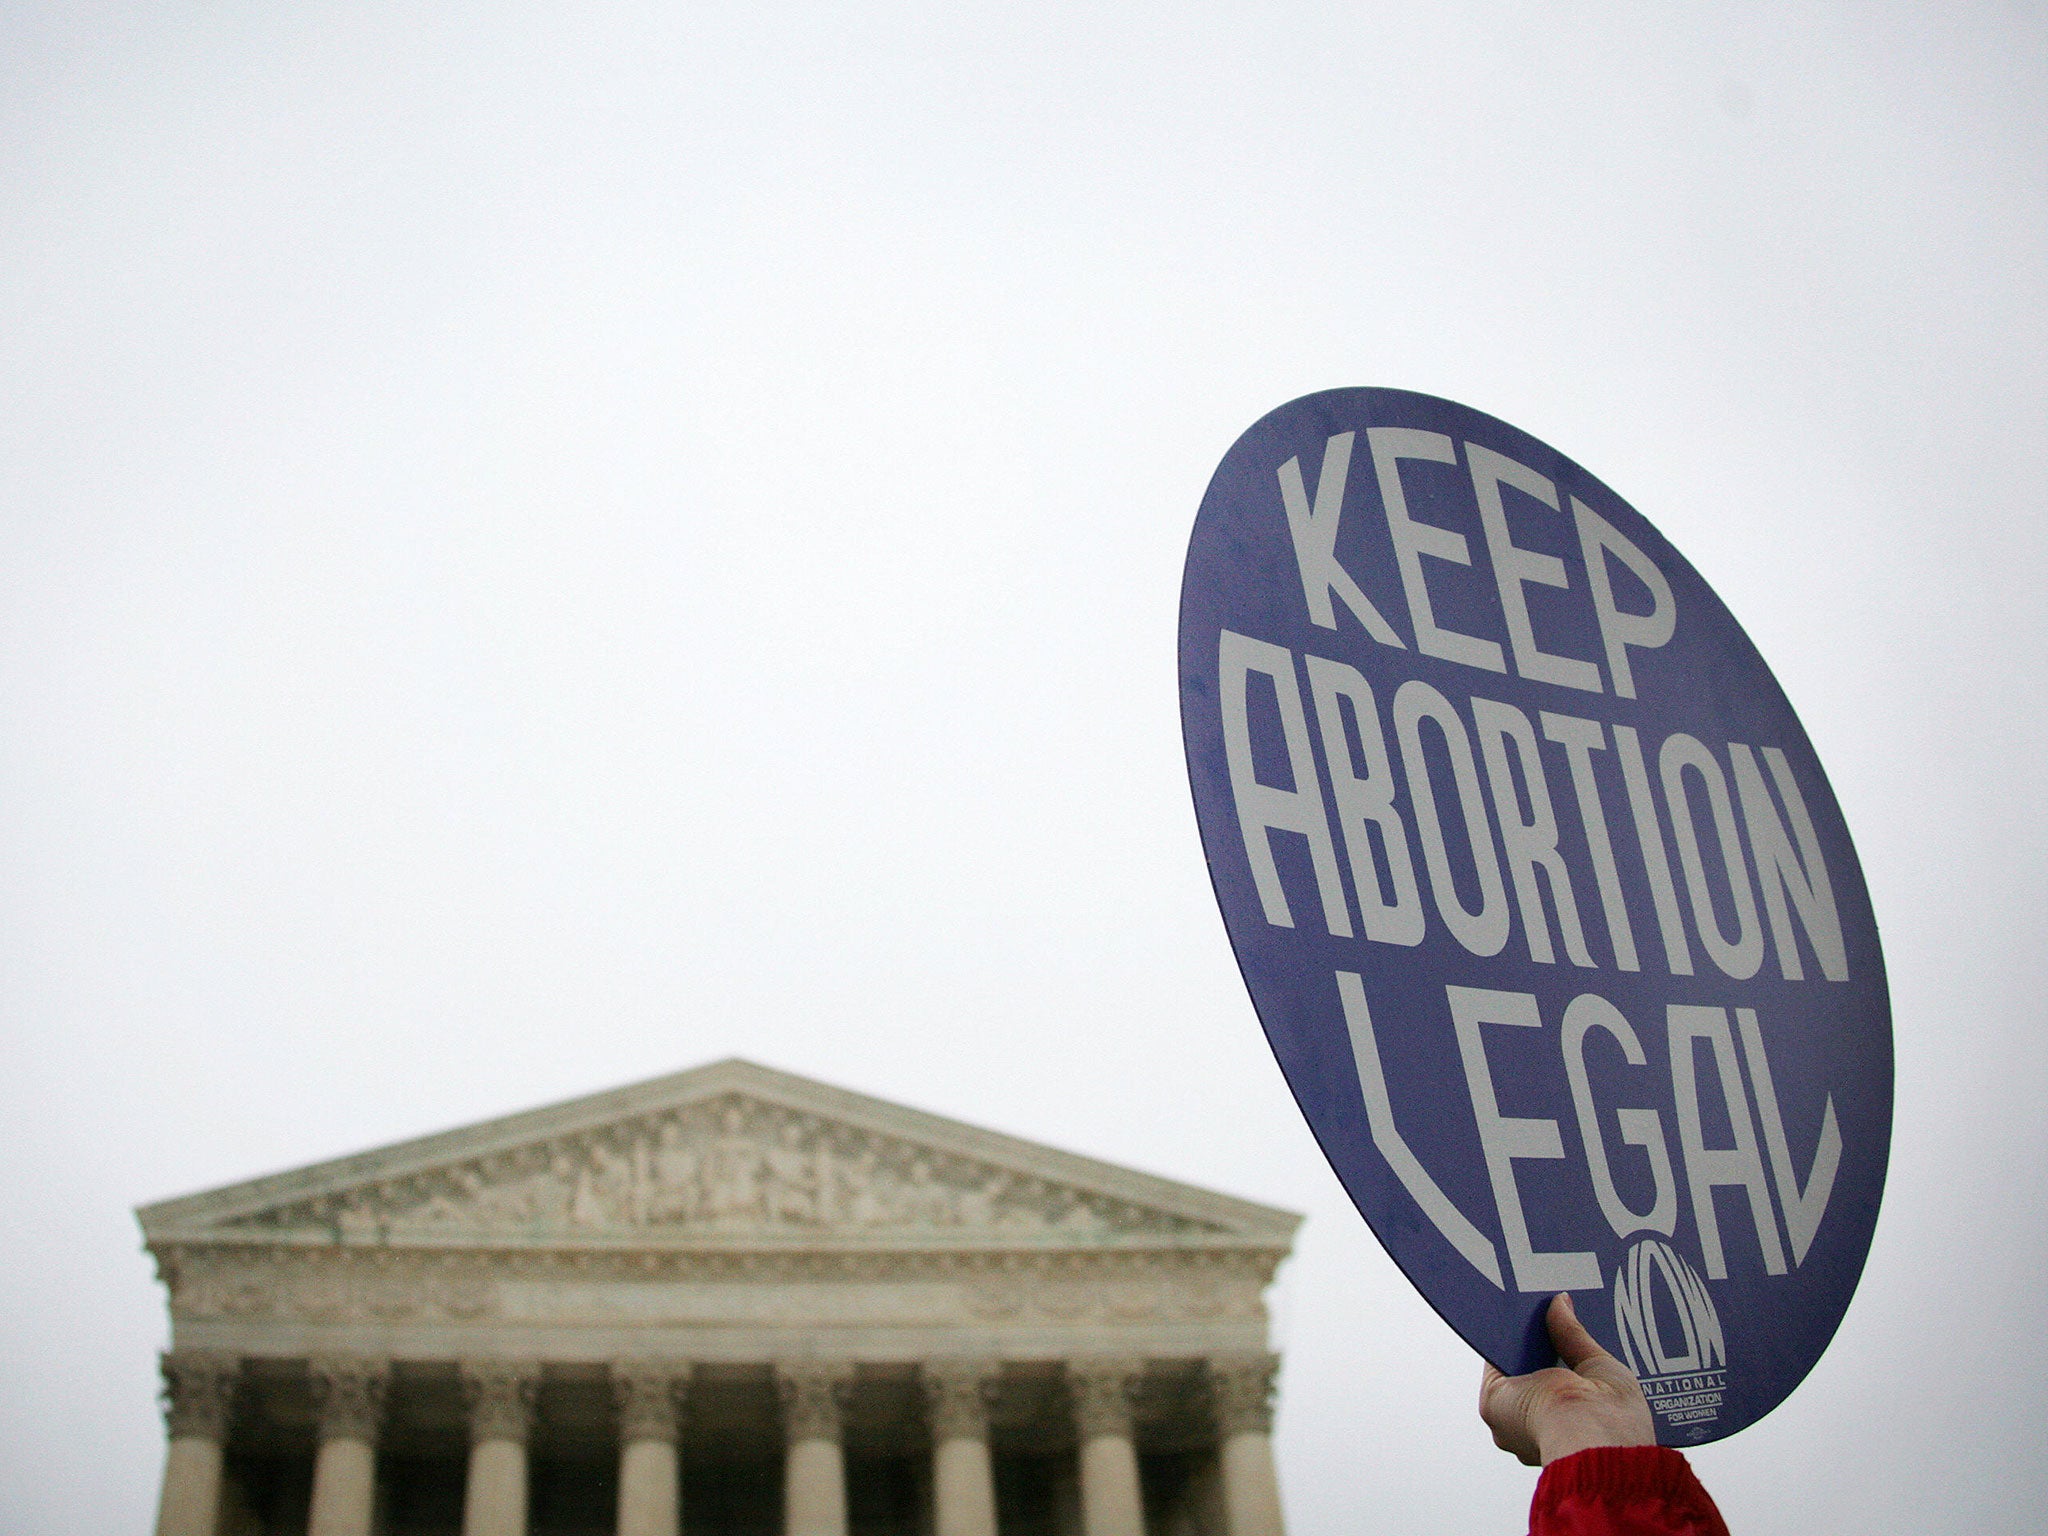 A pro-choice demonstrator holds up a placard outside the US Supreme Court (rear) in Washington, DC, 08 November 2006 as the court hears oral arguments in the partial-birth abortion ban case. The court is weighing in on the constitutionality of a law banning a surgical method to terminate a pregnancy